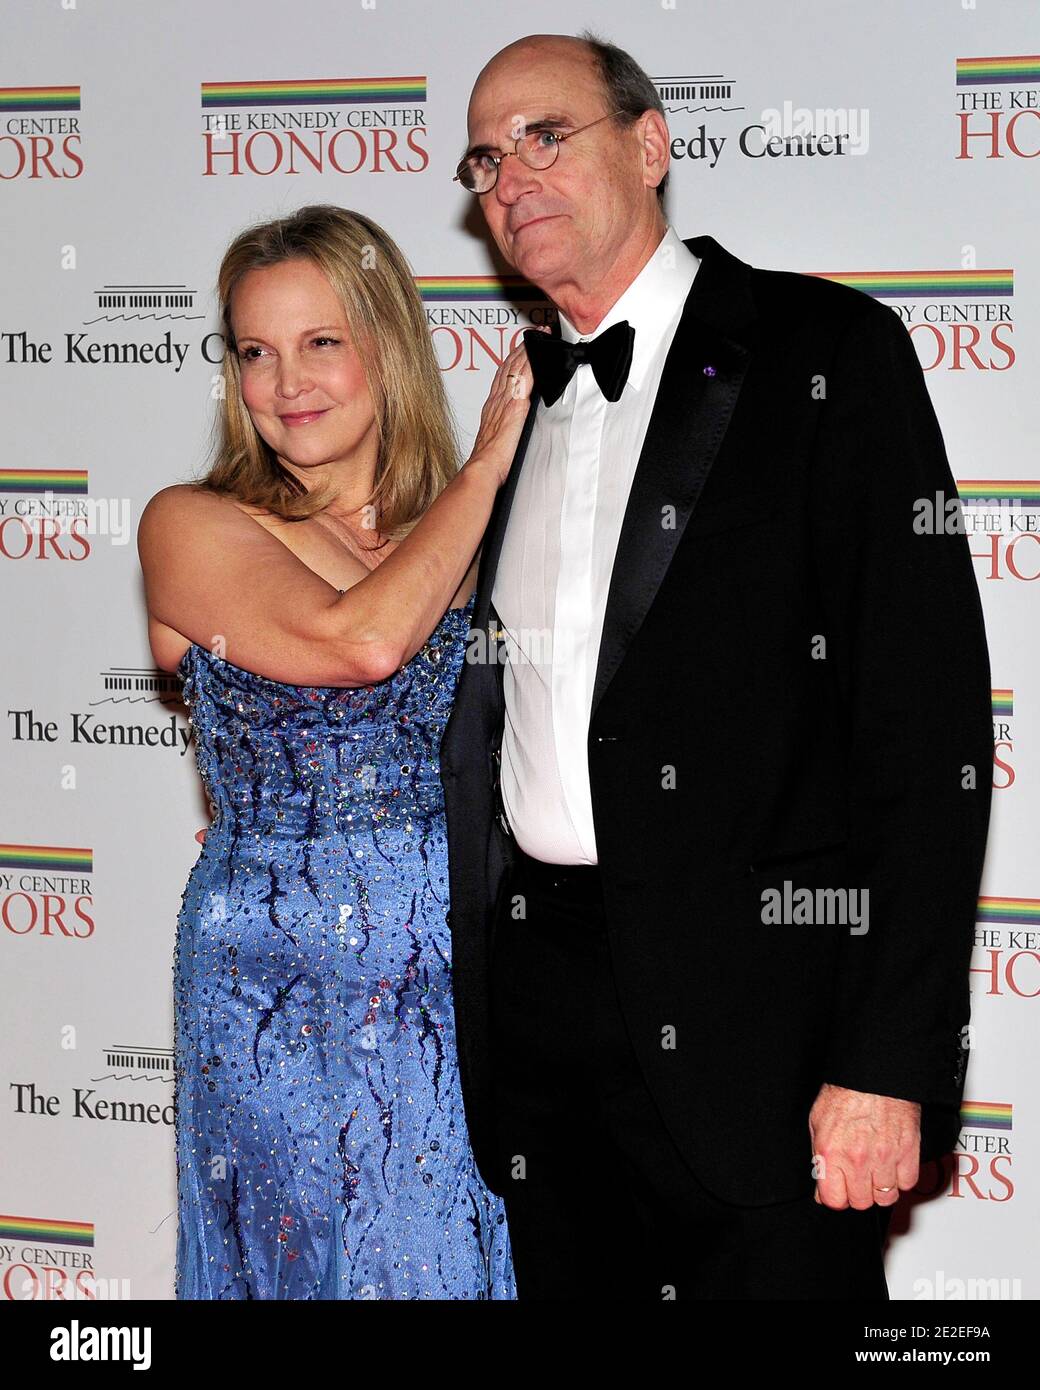 James Taylor and his wife, Caroline 'Kim' Smedvig, arrive for the formal Artist's Dinner honoring the recipients of the 2011 Kennedy Center Honors hosted by United States Secretary of State, Hillary Rodham Clinton at the U.S. Department of State in Washington, D.C., on December 3, 2011. The 2011 honorees are actress Meryl Streep, singer Neil Diamond, actress Barbara Cook, musician Yo-Yo Ma, and musician Sonny Rollins. Photo by Ron Sachs/CNP/ABACAPRESS.COM Stock Photo